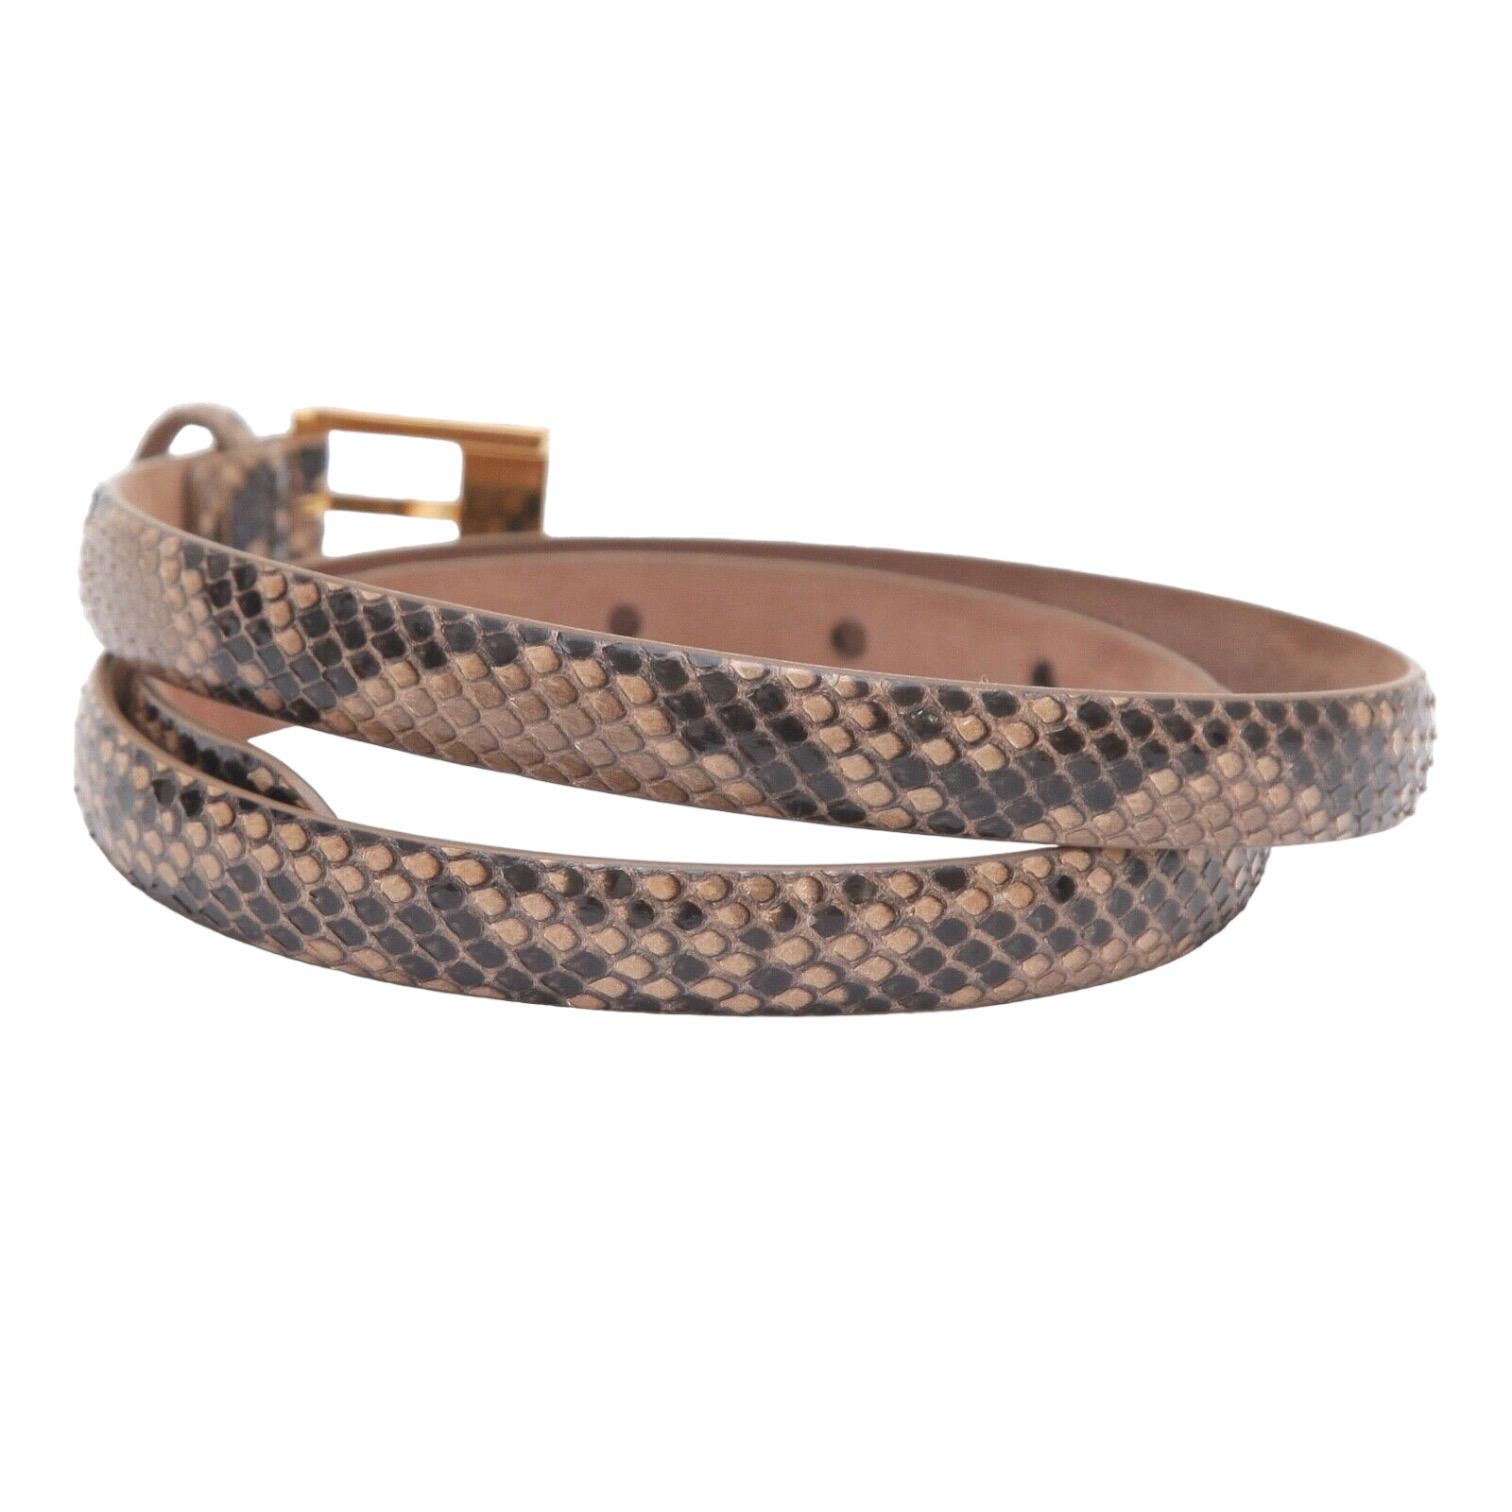 GUARANTEED AUTHENTIC MICHAEL KORS EXOTIC LEATHER SKINNY BELT

Retail excluding sales taxes $595

Details:
- From my personal collection.
- Exotic leather in brown cream colors.
- Thin skinny width.
- 4 holes.
- Gold-tone adjustable buckle.
-